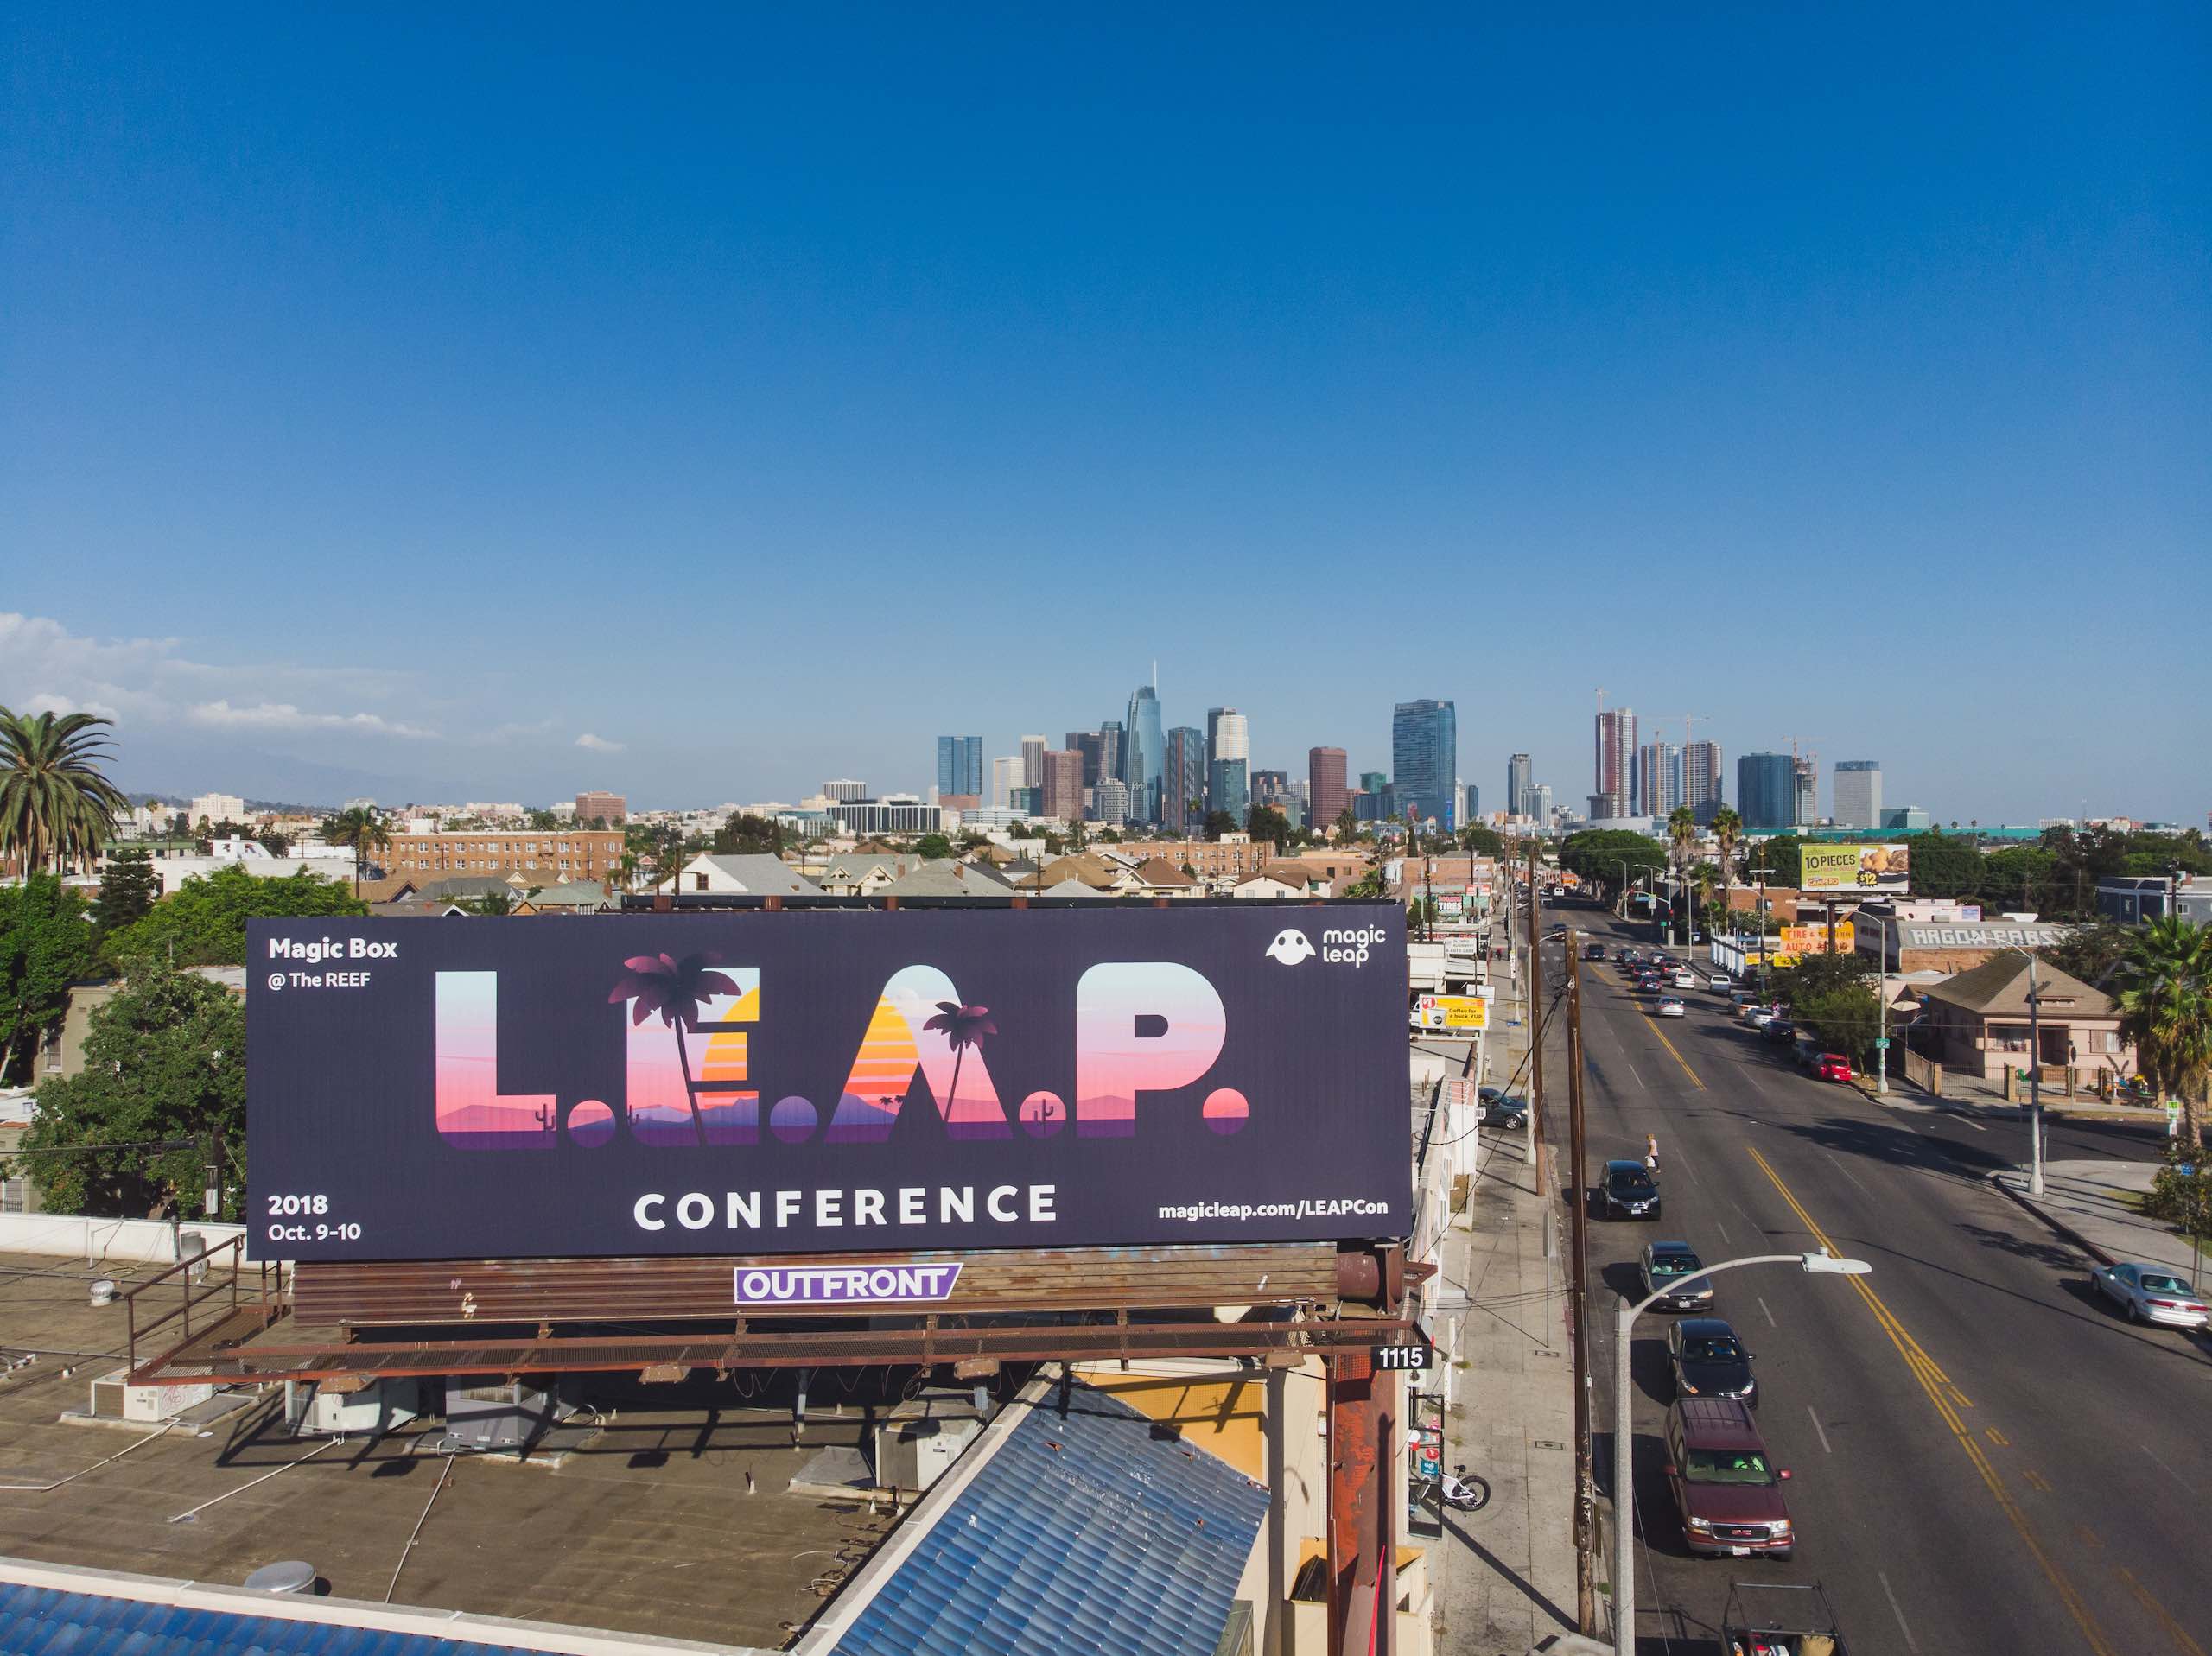 DUPLICATE View from drone of LEAP Conference billboard on display near road with cars parked and driving by